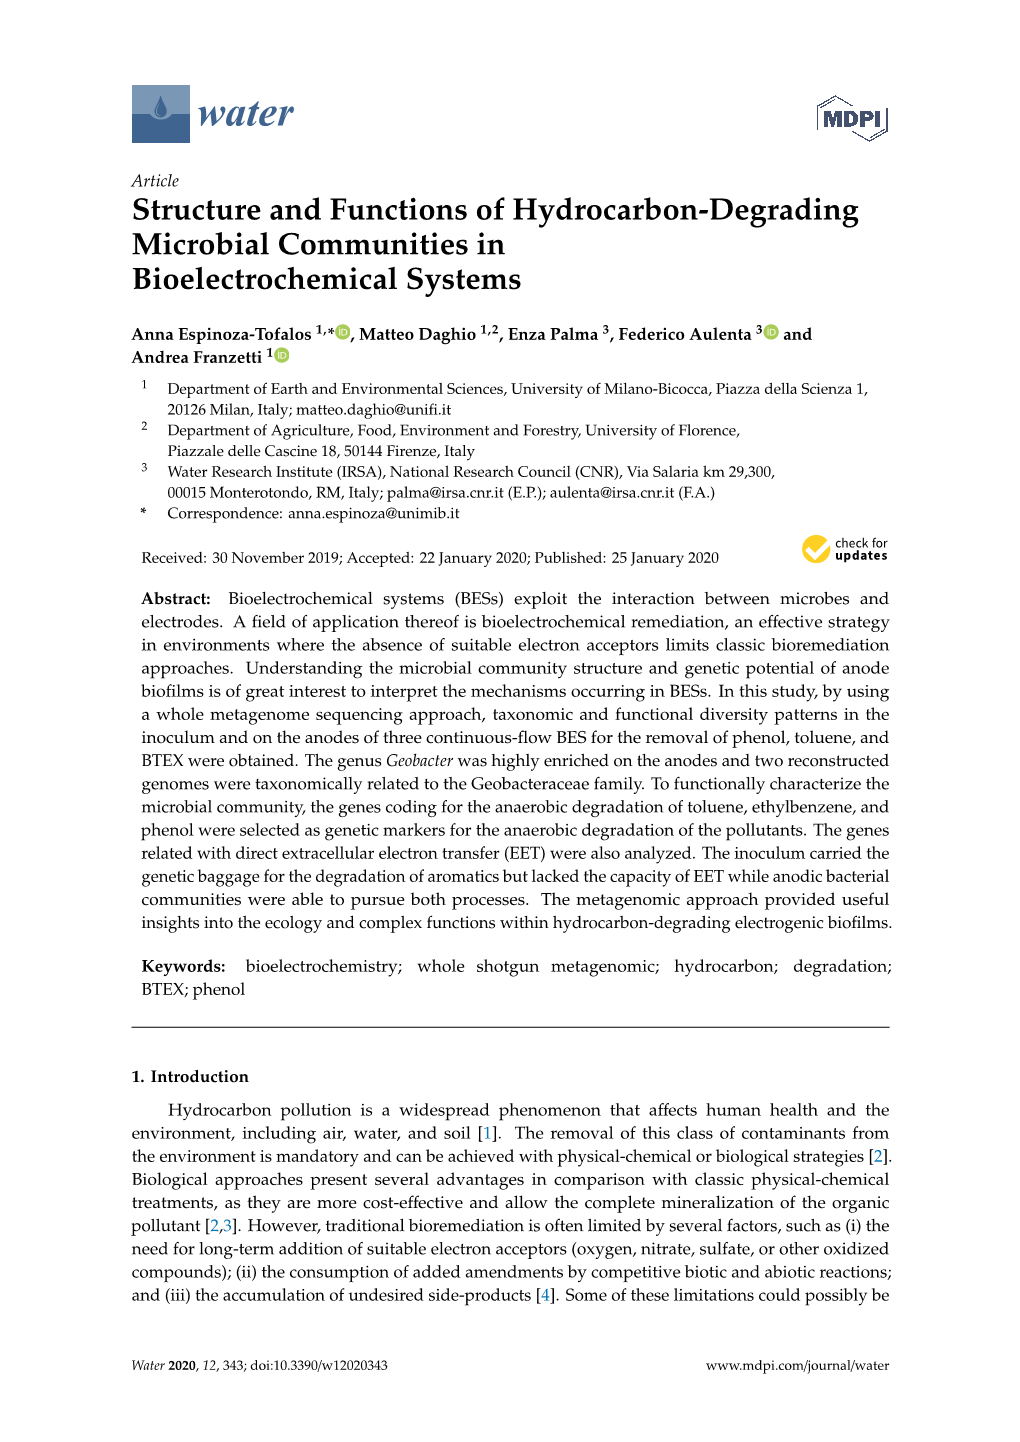 Structure and Functions of Hydrocarbon-Degrading Microbial Communities in Bioelectrochemical Systems